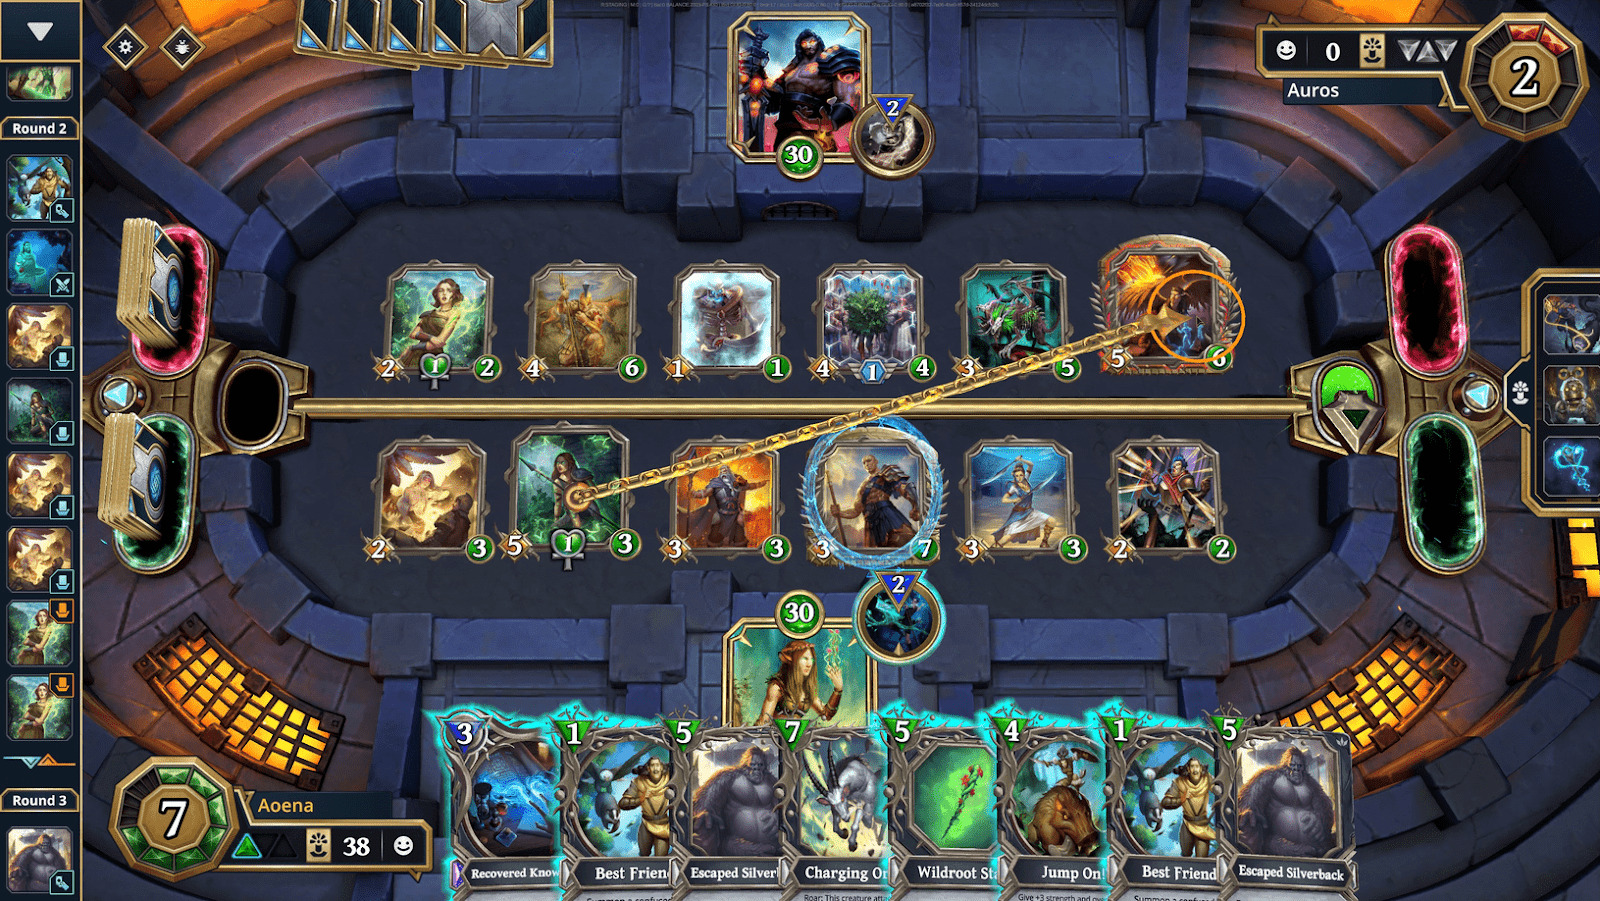 Gods Unchained Review » An NFT Card Game Worth a Try